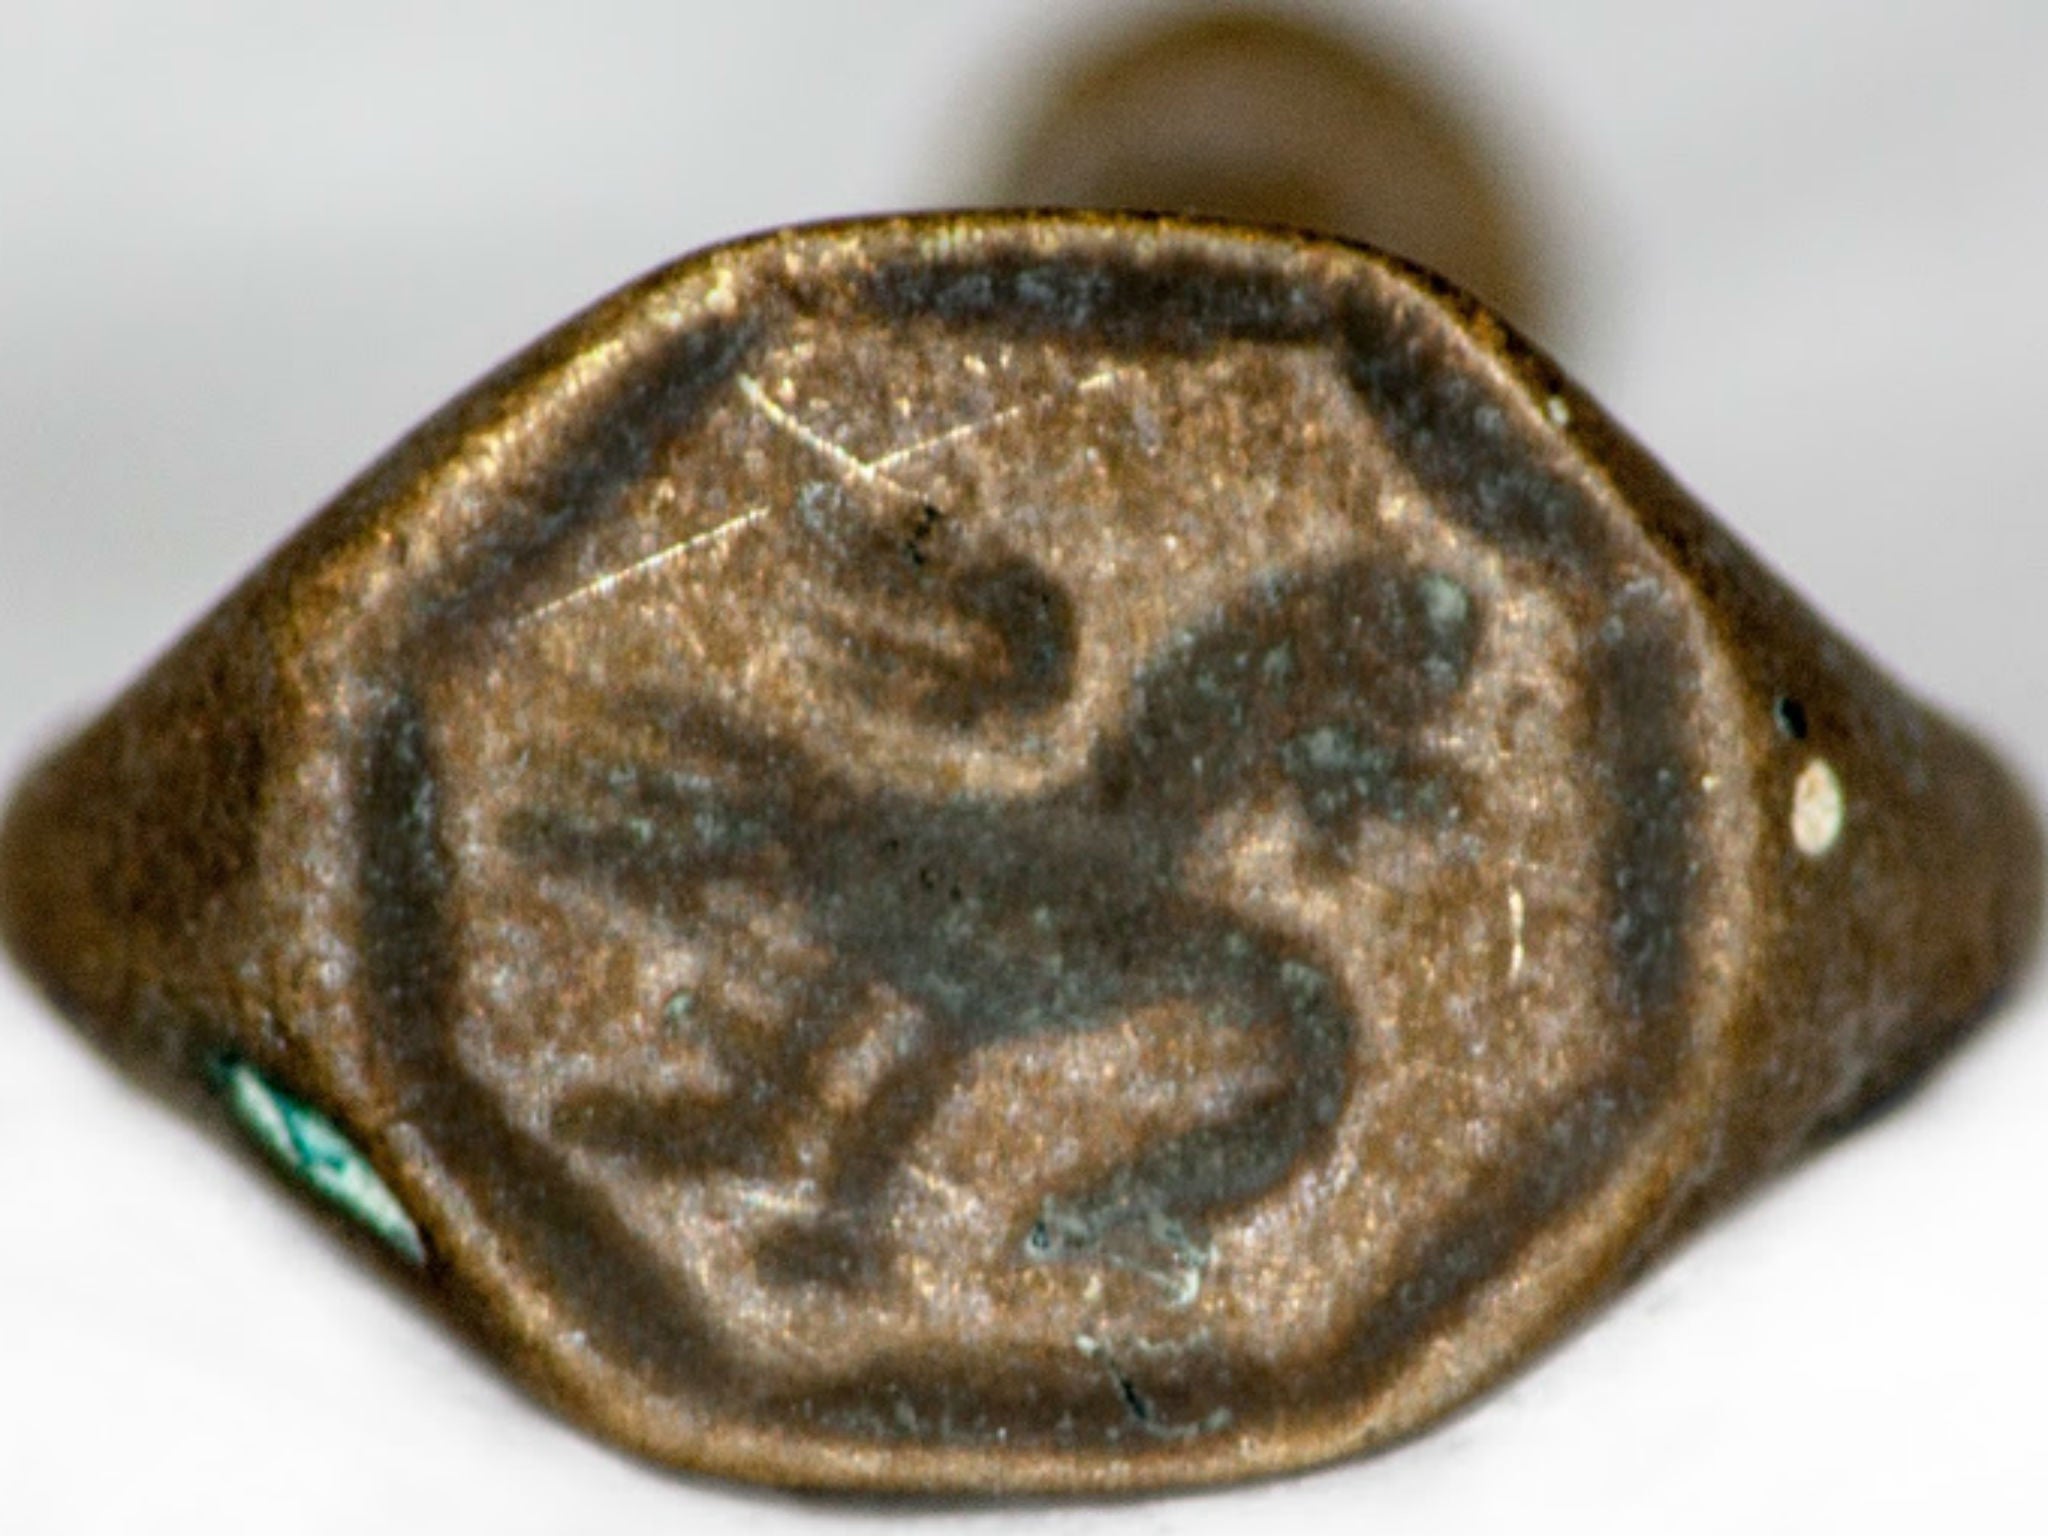 A metal signet pipe tamper ring with a possible griffin figure seal. The seal could be used with wax to impress upon letters and could also be worn as a ring by its owner. The tamper end could also be used for tamping down pipe tobacco when packing the bowl of the pipe